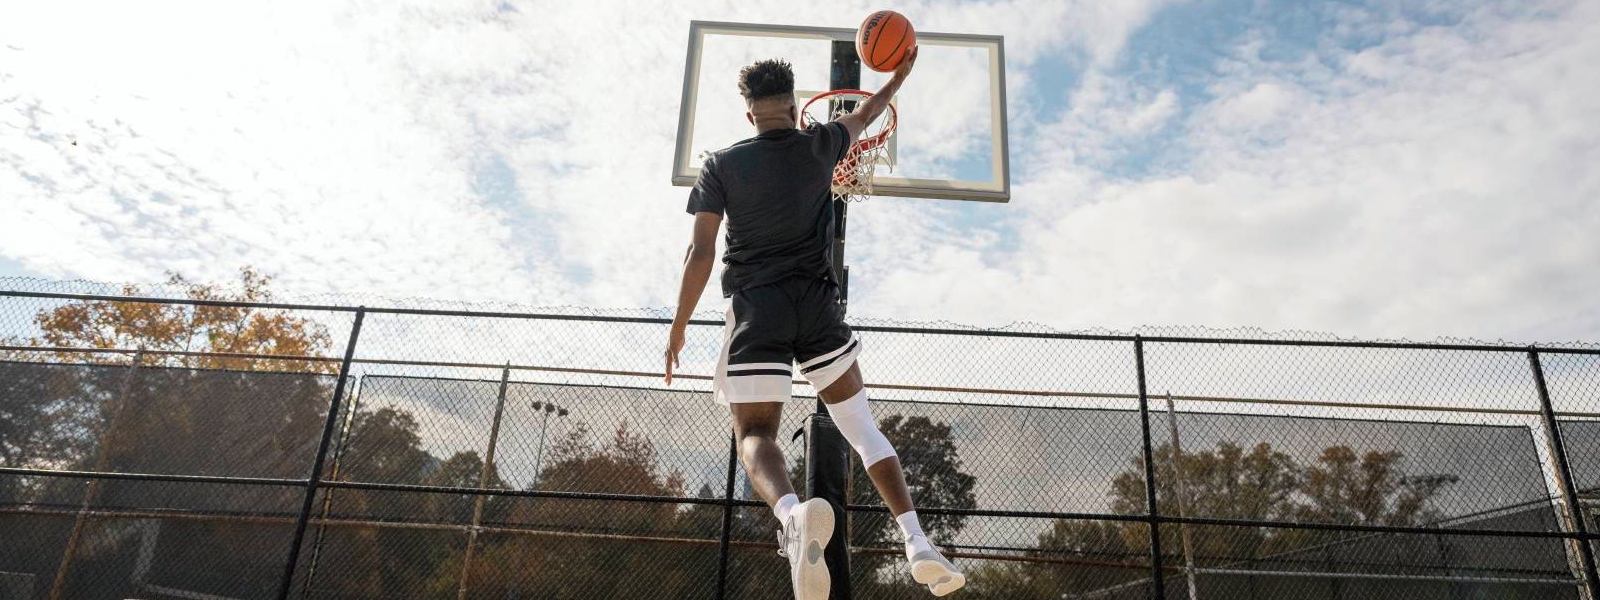 Basketball player jumps on a free space to the basket and is wearing a white knee band